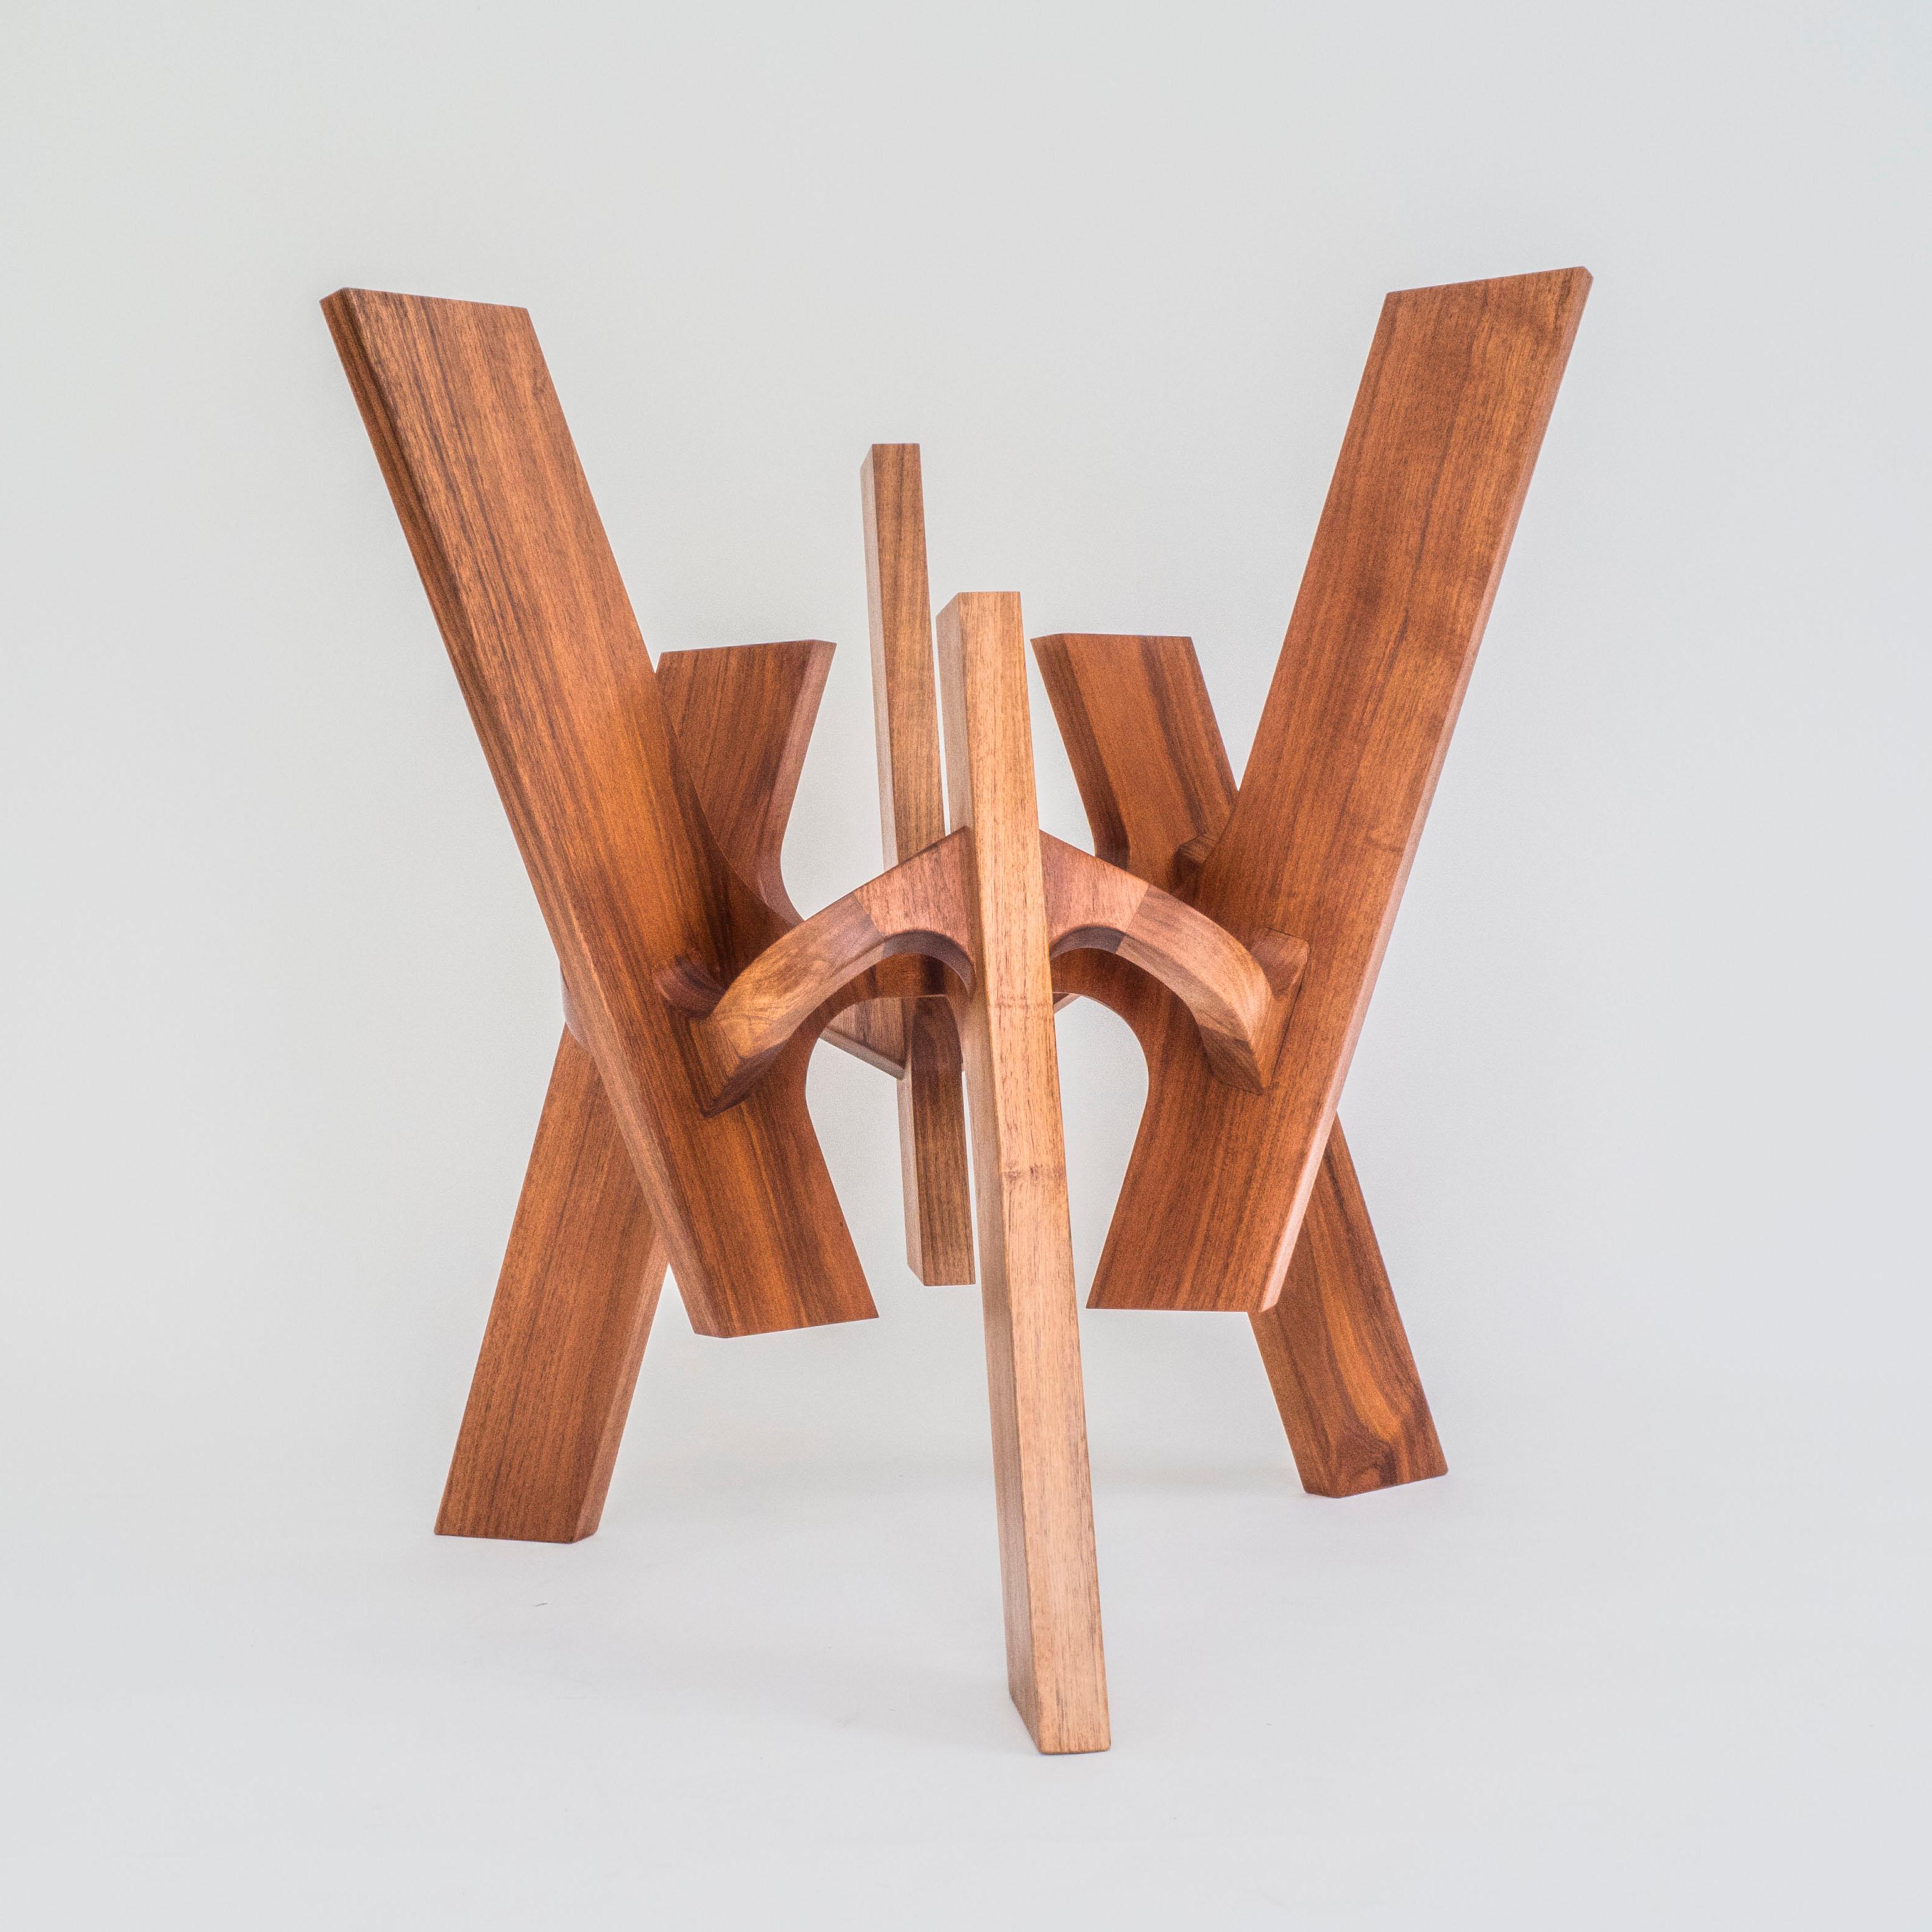 Astra, Geometric Sculptural Center Table Made of Solid Wood by Pedro Cerisola For Sale 1